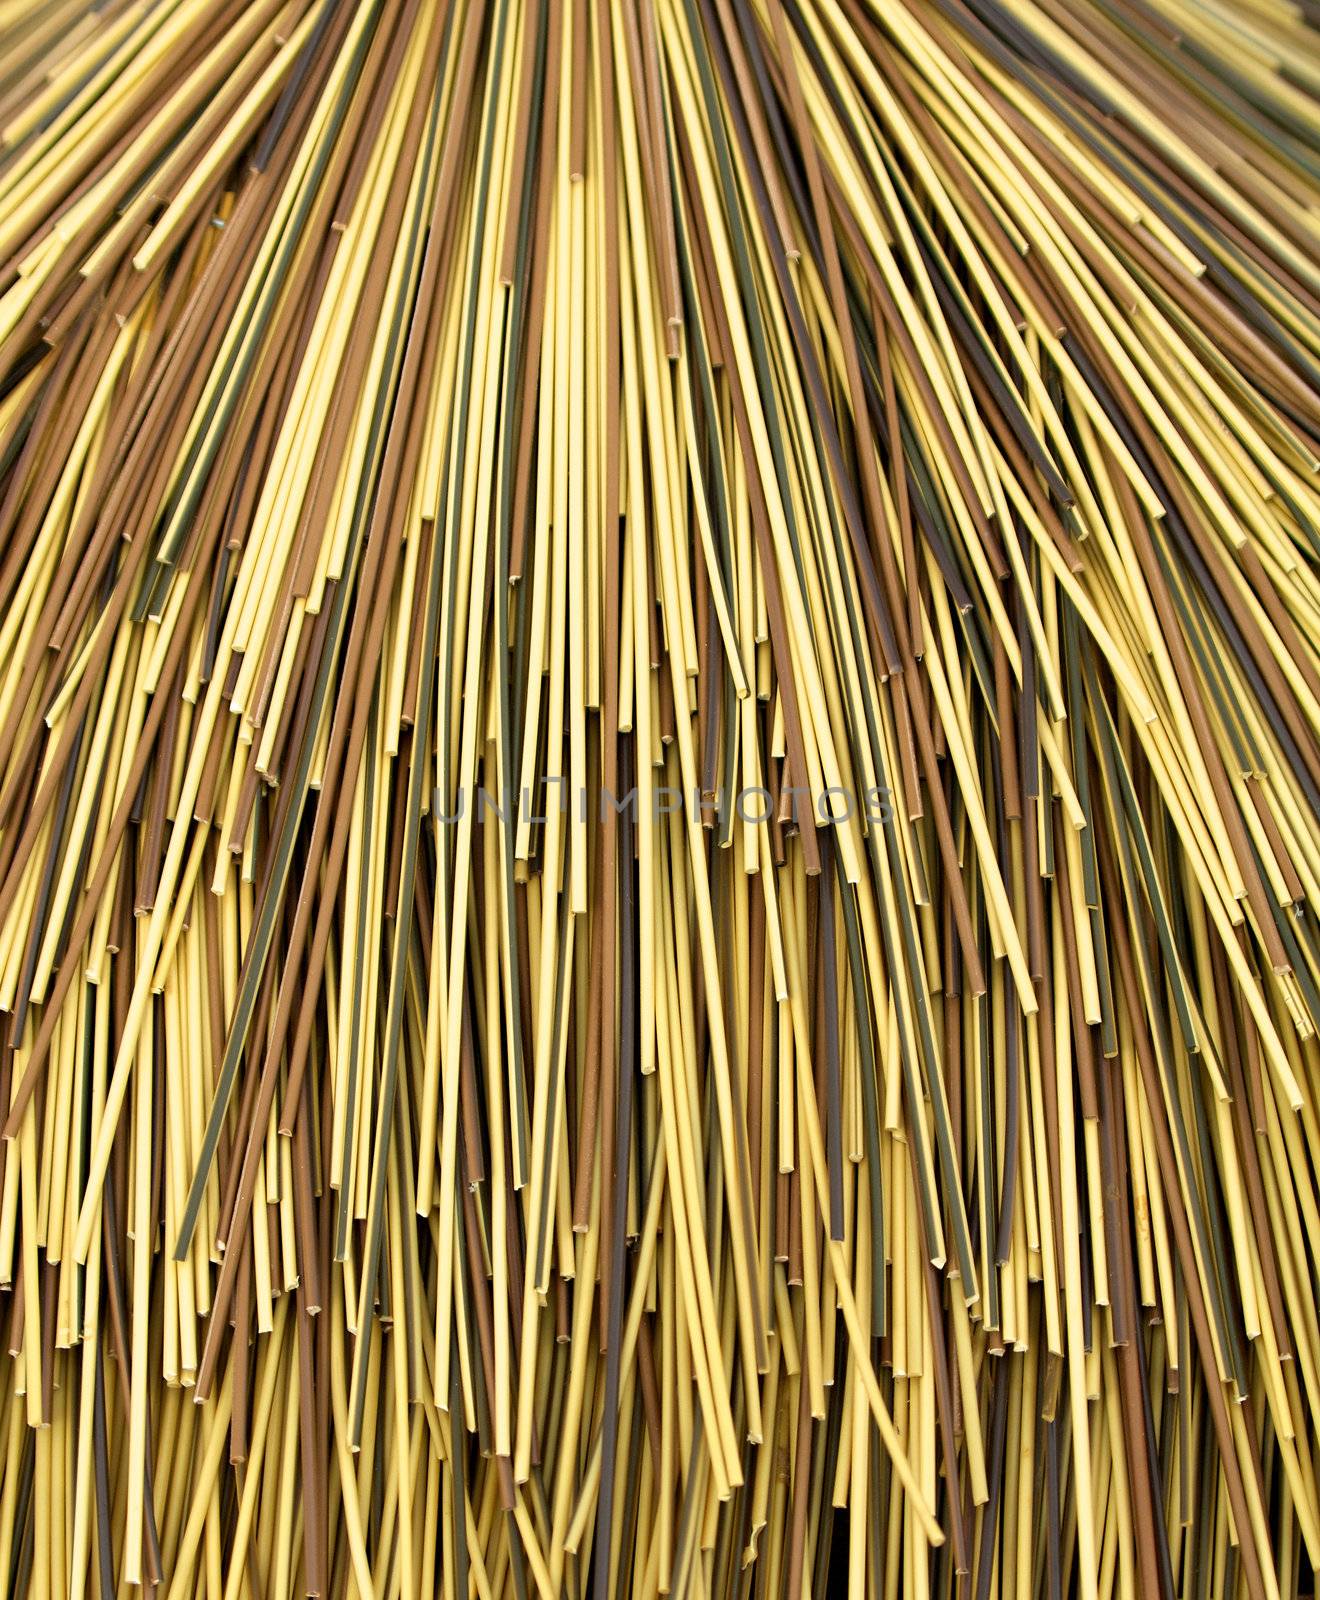 Multi color Bamboo cane closeup as background